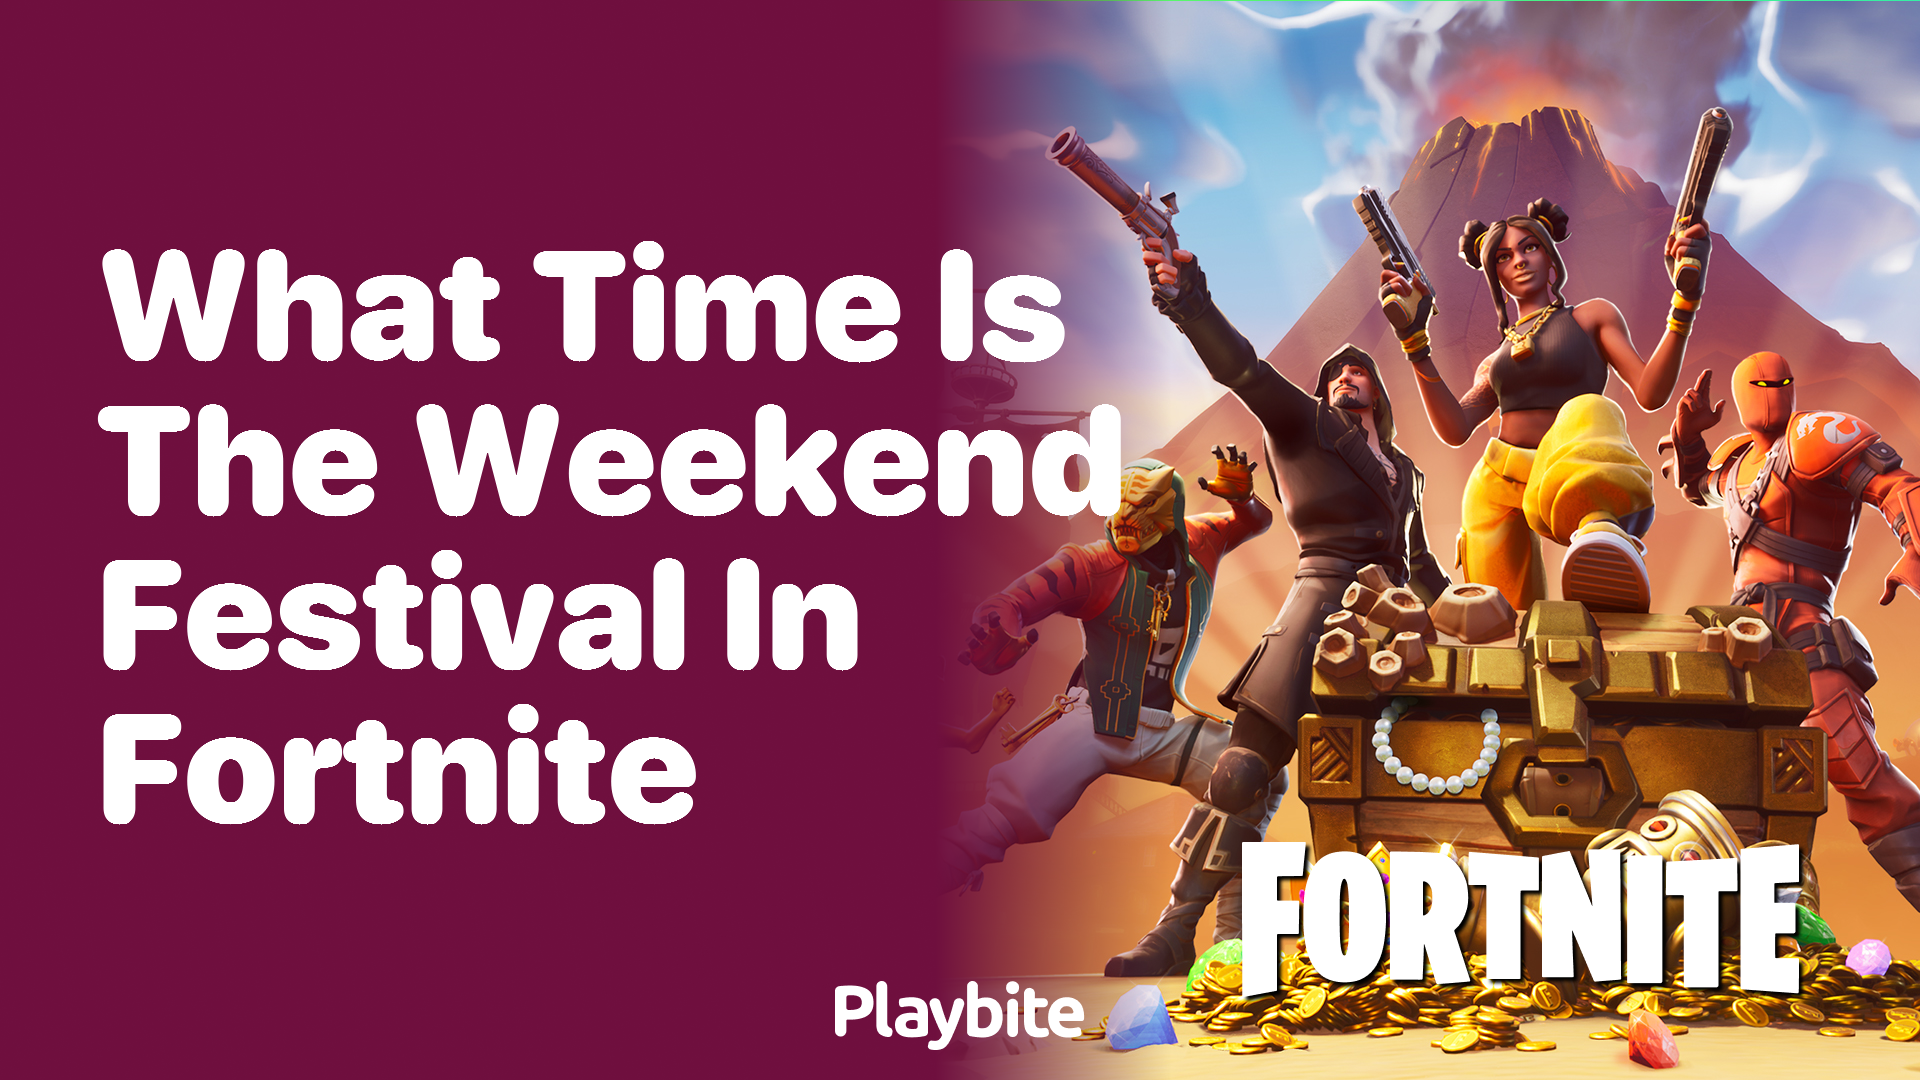 What Time is the Weekend Festival in Fortnite?